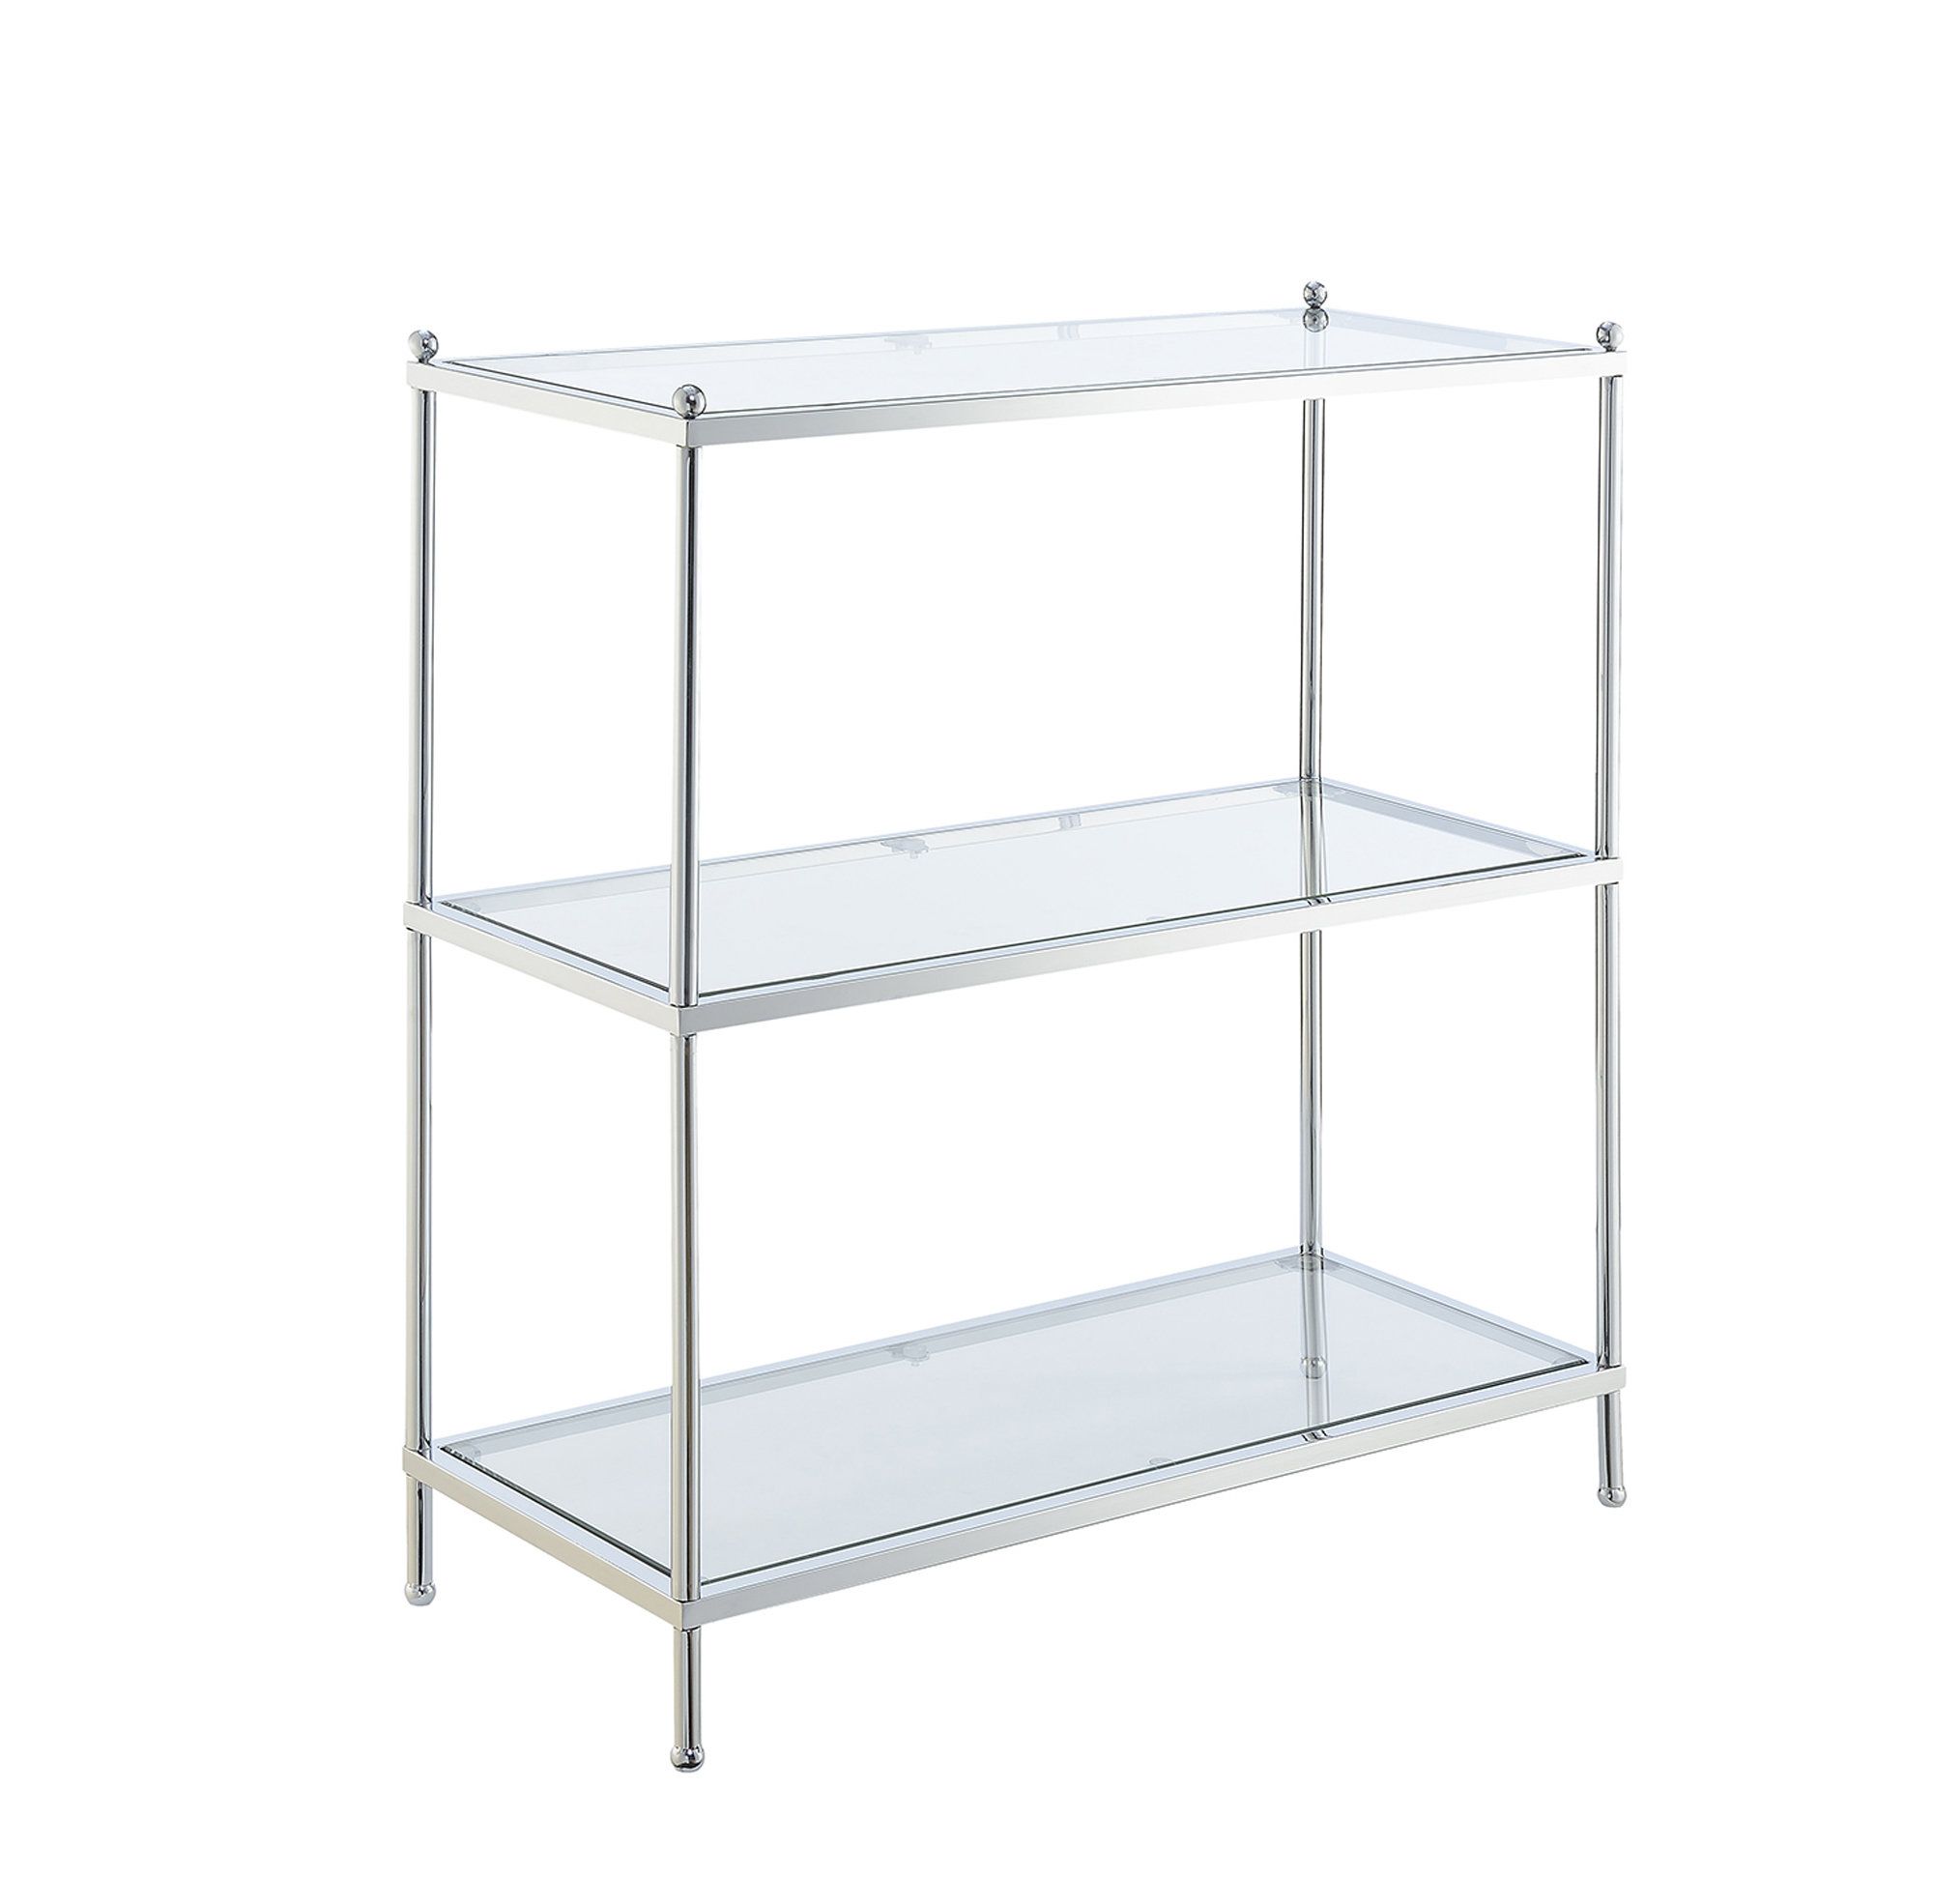 Adair Etagere Bookcases Inside Well Known Stamford 3 Tier Etagere Bookcase (View 20 of 20)